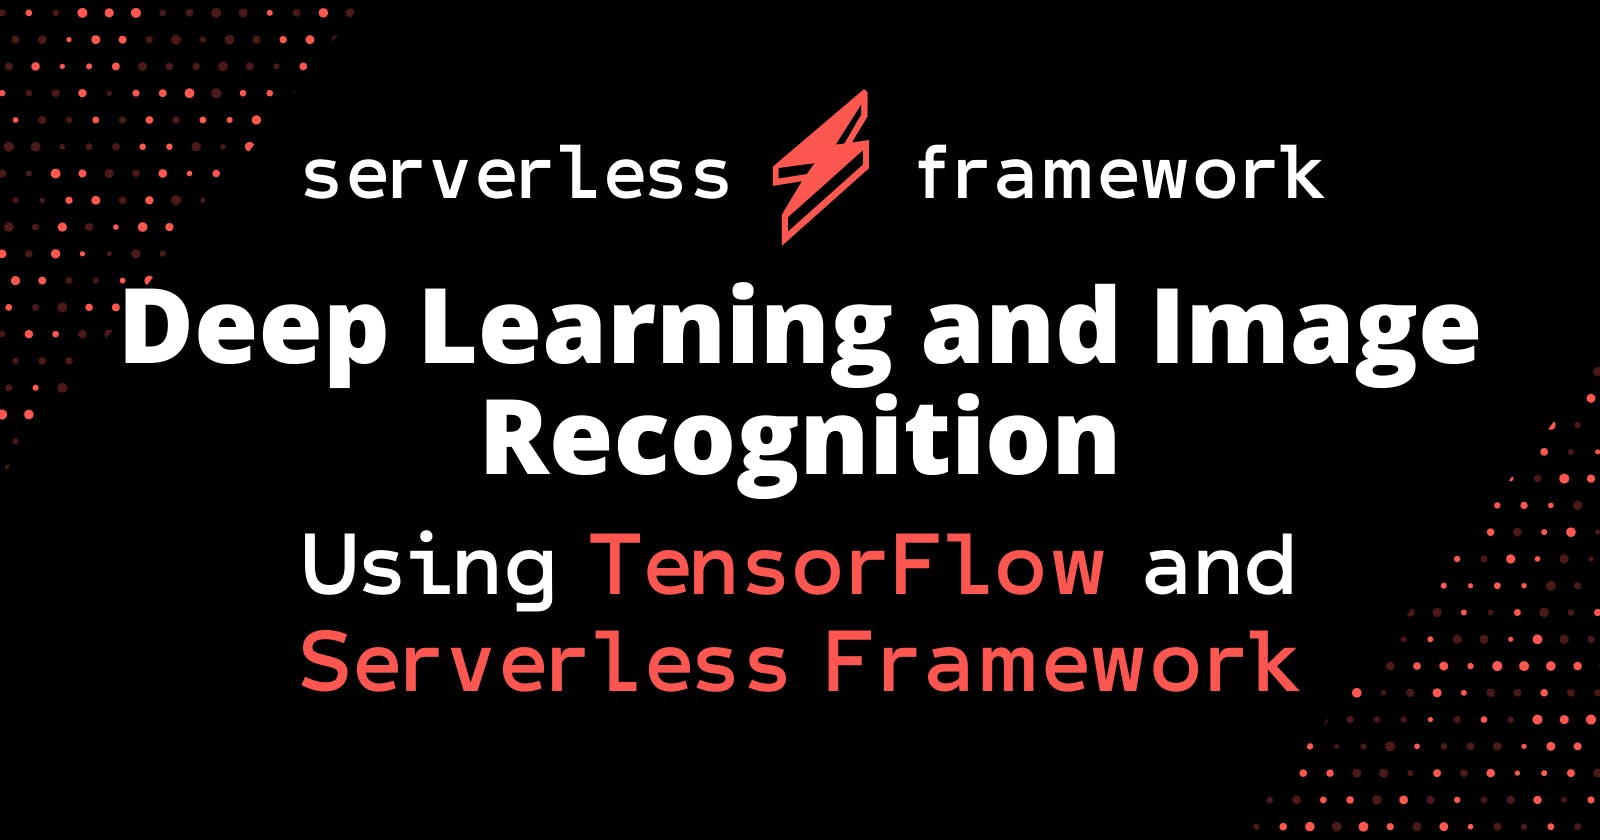 Using TensorFlow and the Serverless Framework for deep learning and image recognition